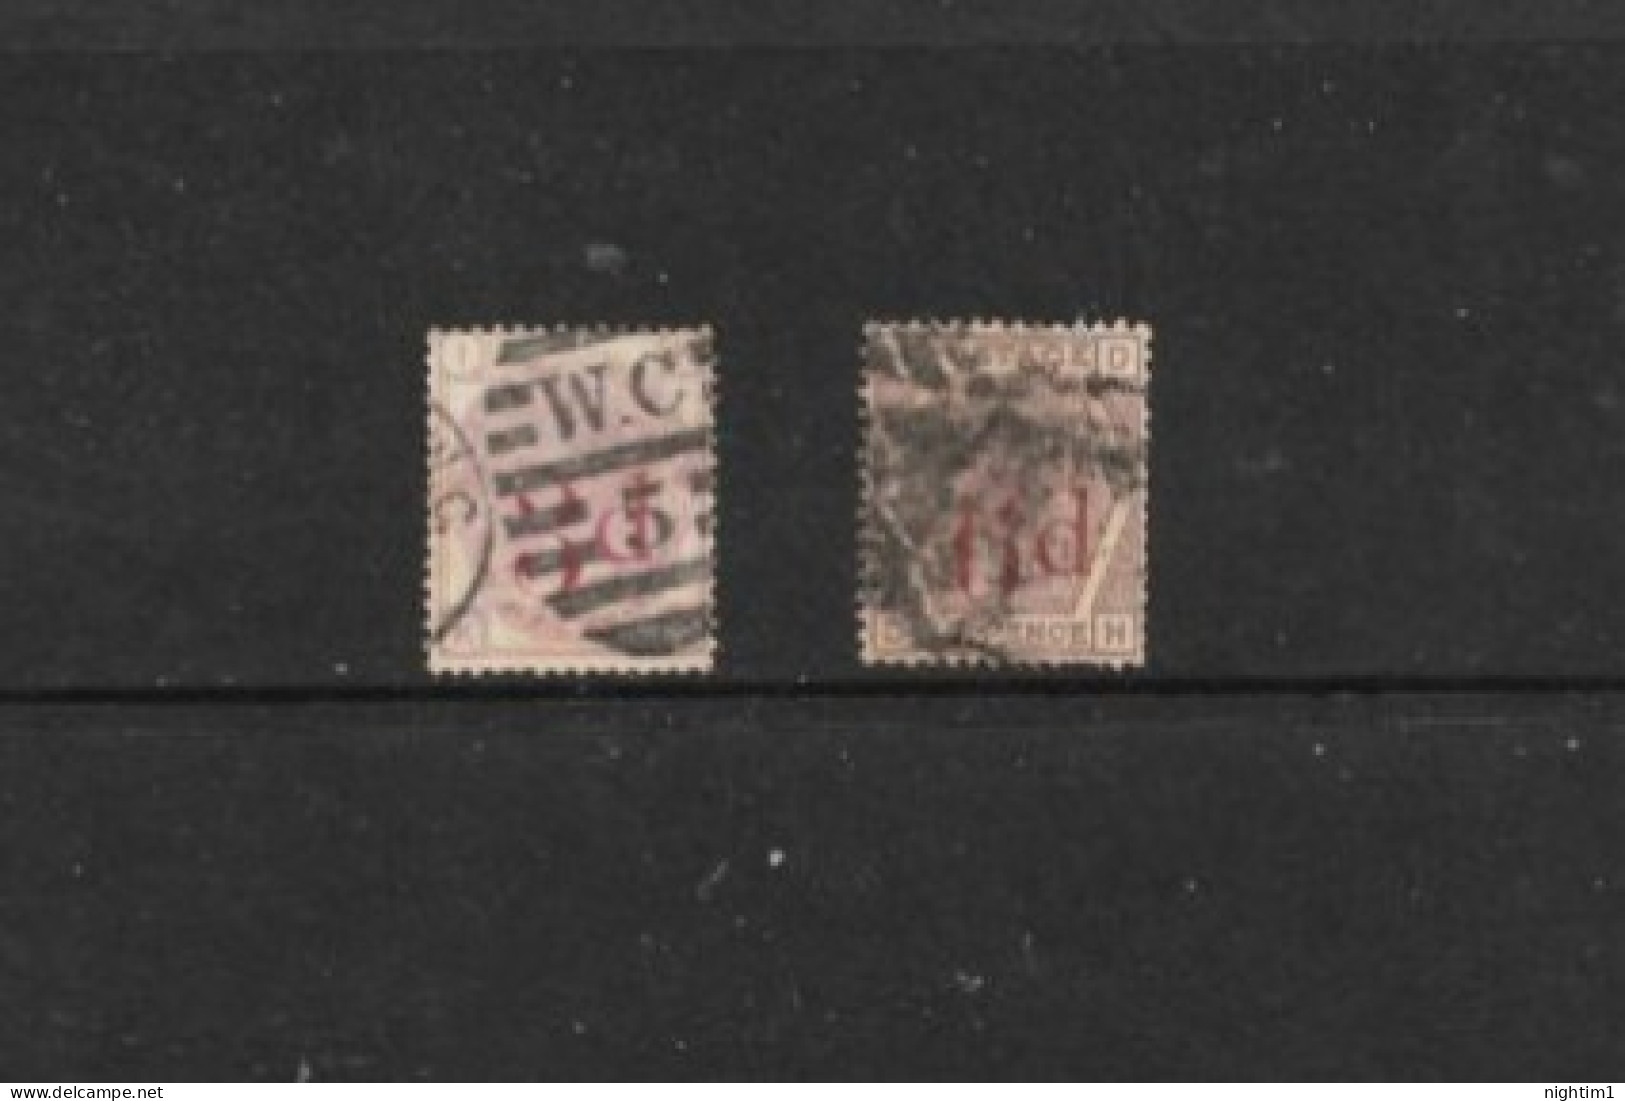 GREAT BRITAIN COLLECTION.  3d ON 3d AND 6d ON 6d. TWO STAMPS. - Usados